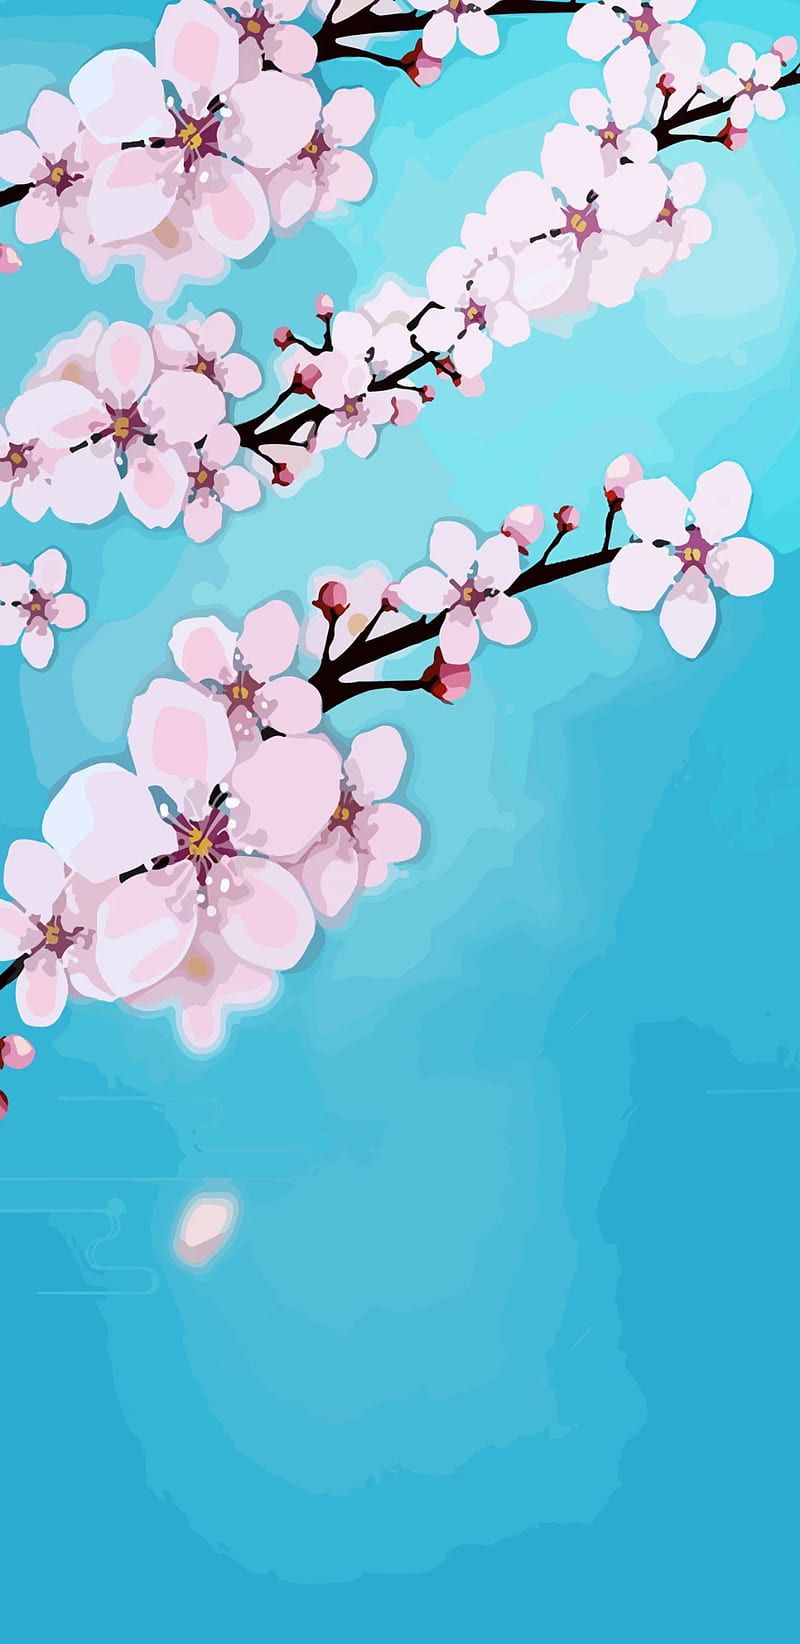 Blue cherry blossom branch illustration on blue background  premium image  by rawpixelcom  Aom Wo  Cherry blossom background Cherry blossom  branch Blue cherry